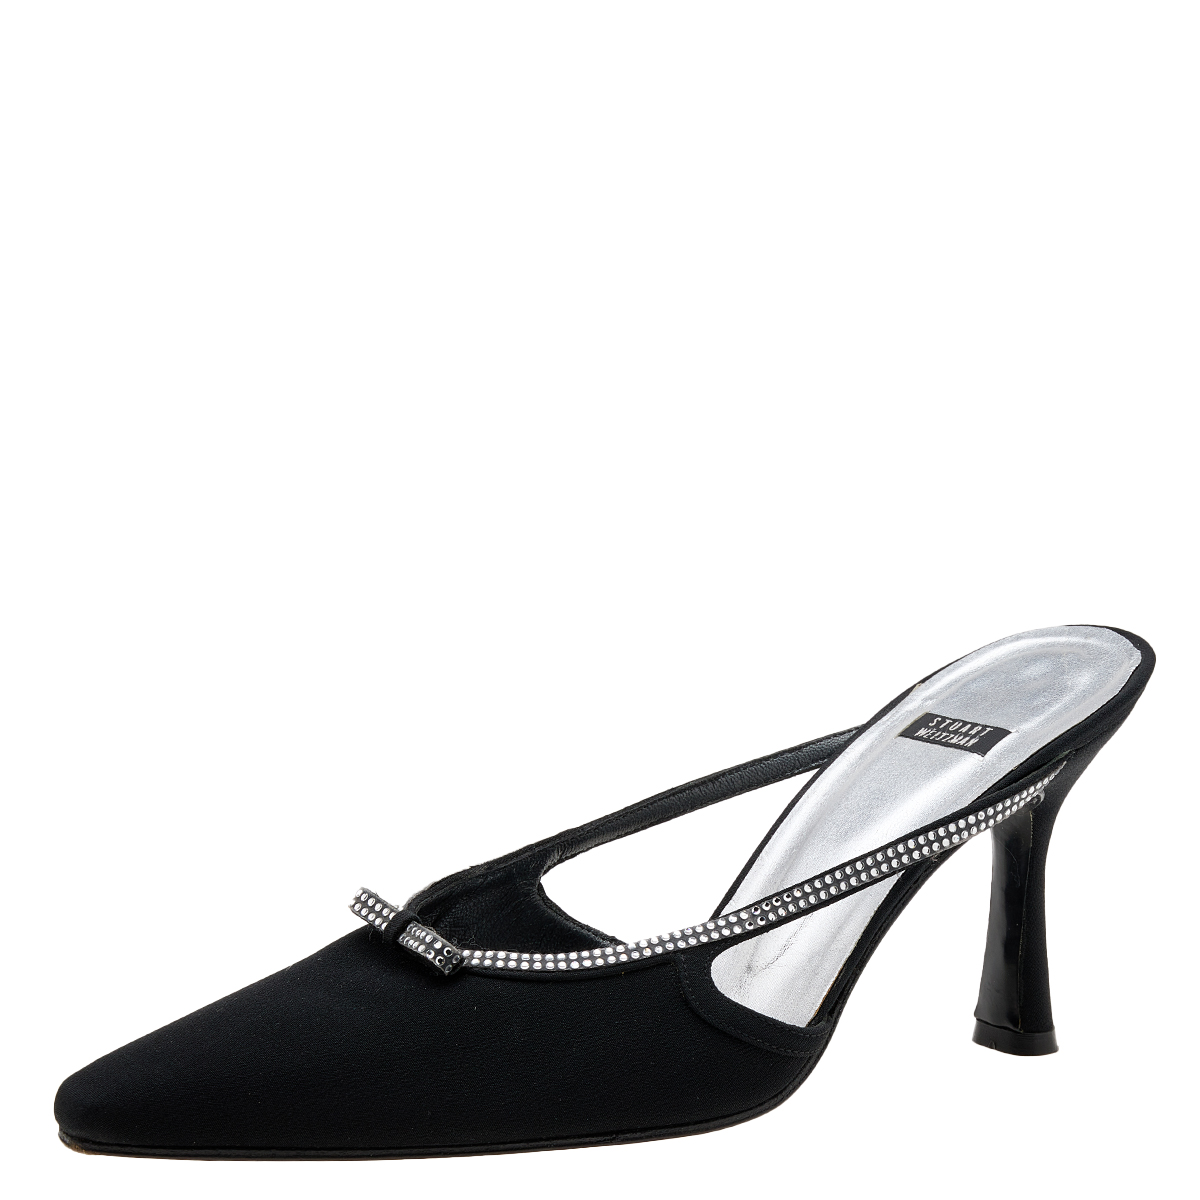 Designed with pointed toes and crystal embellished fronts these Stuart Weitzman mules are truly divine Theyve been beautifully crafted from fine materials in a classic black hue. They are endowed with leather lined insoles along with 9 cm heels and are made for special occasions.